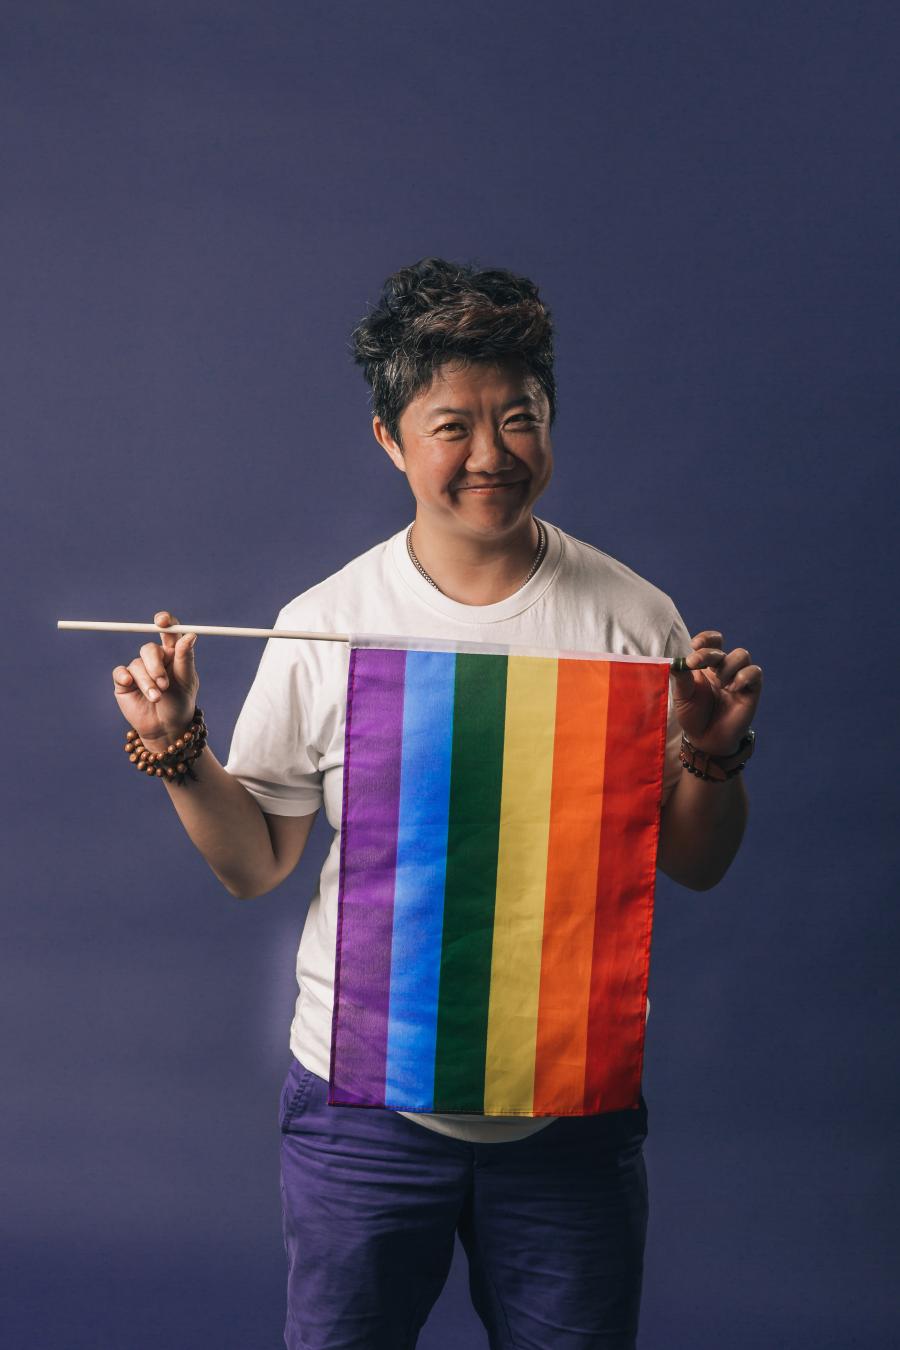 smiling person holding a pride flag